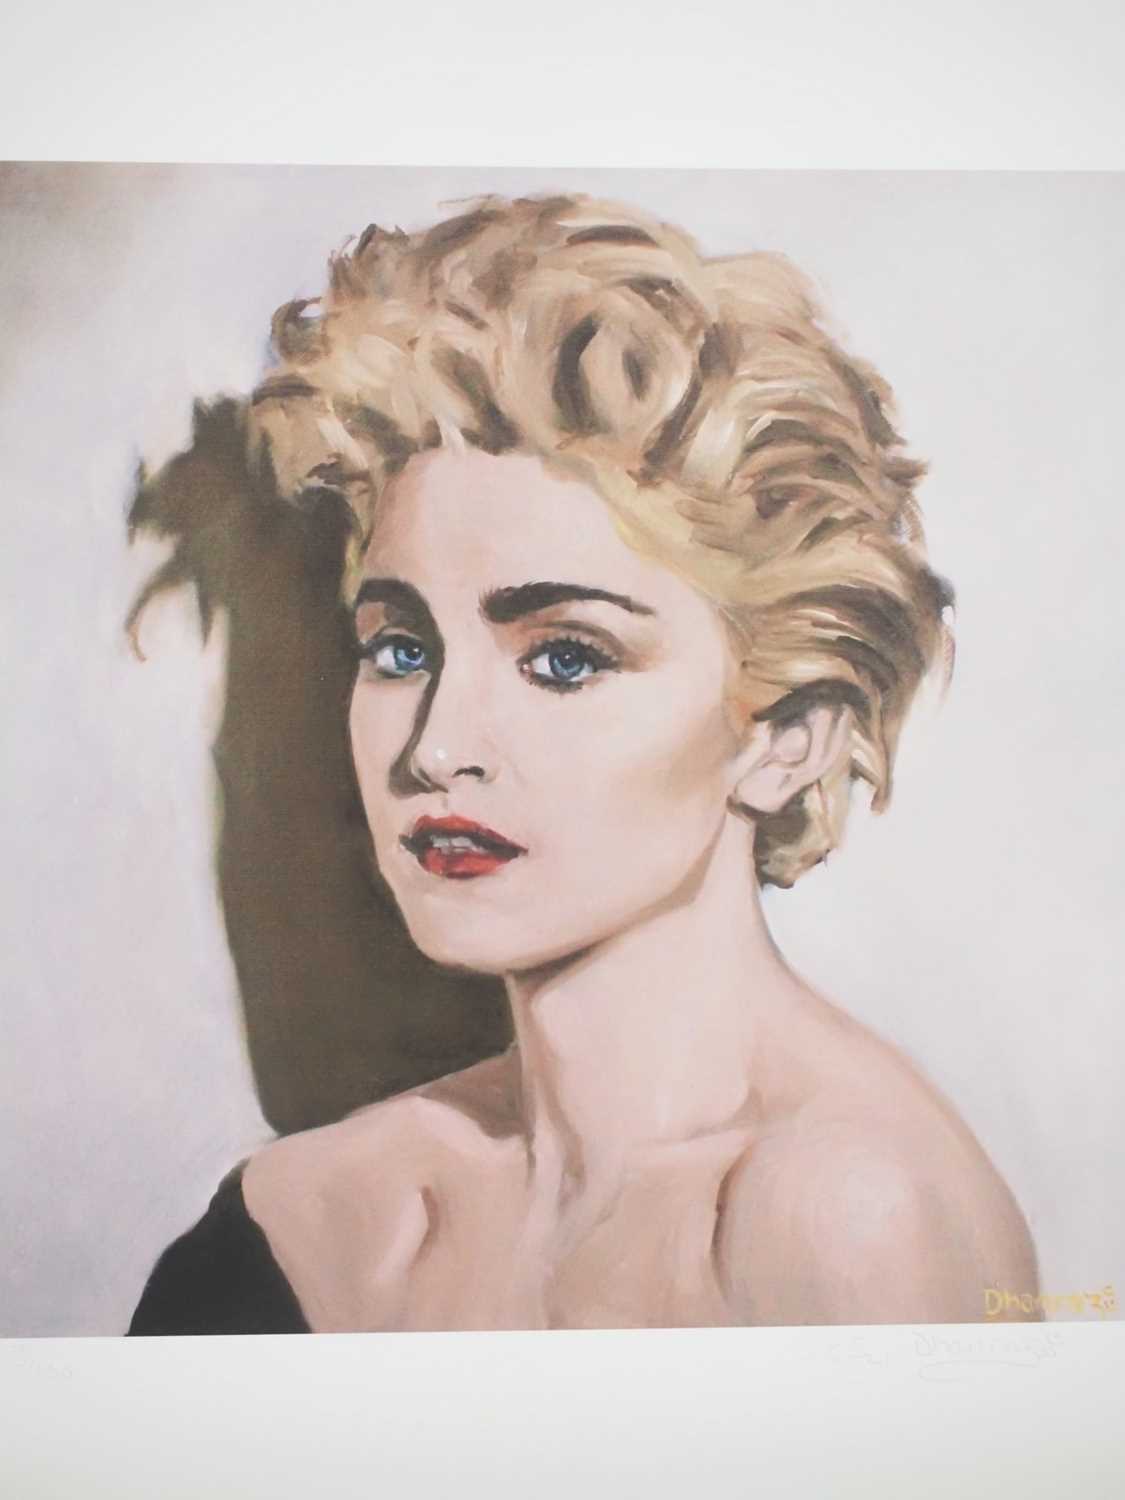 Dhanraz Ramdharry - MADONNA - 3/100 signed and hand numbered limited edition print from original art